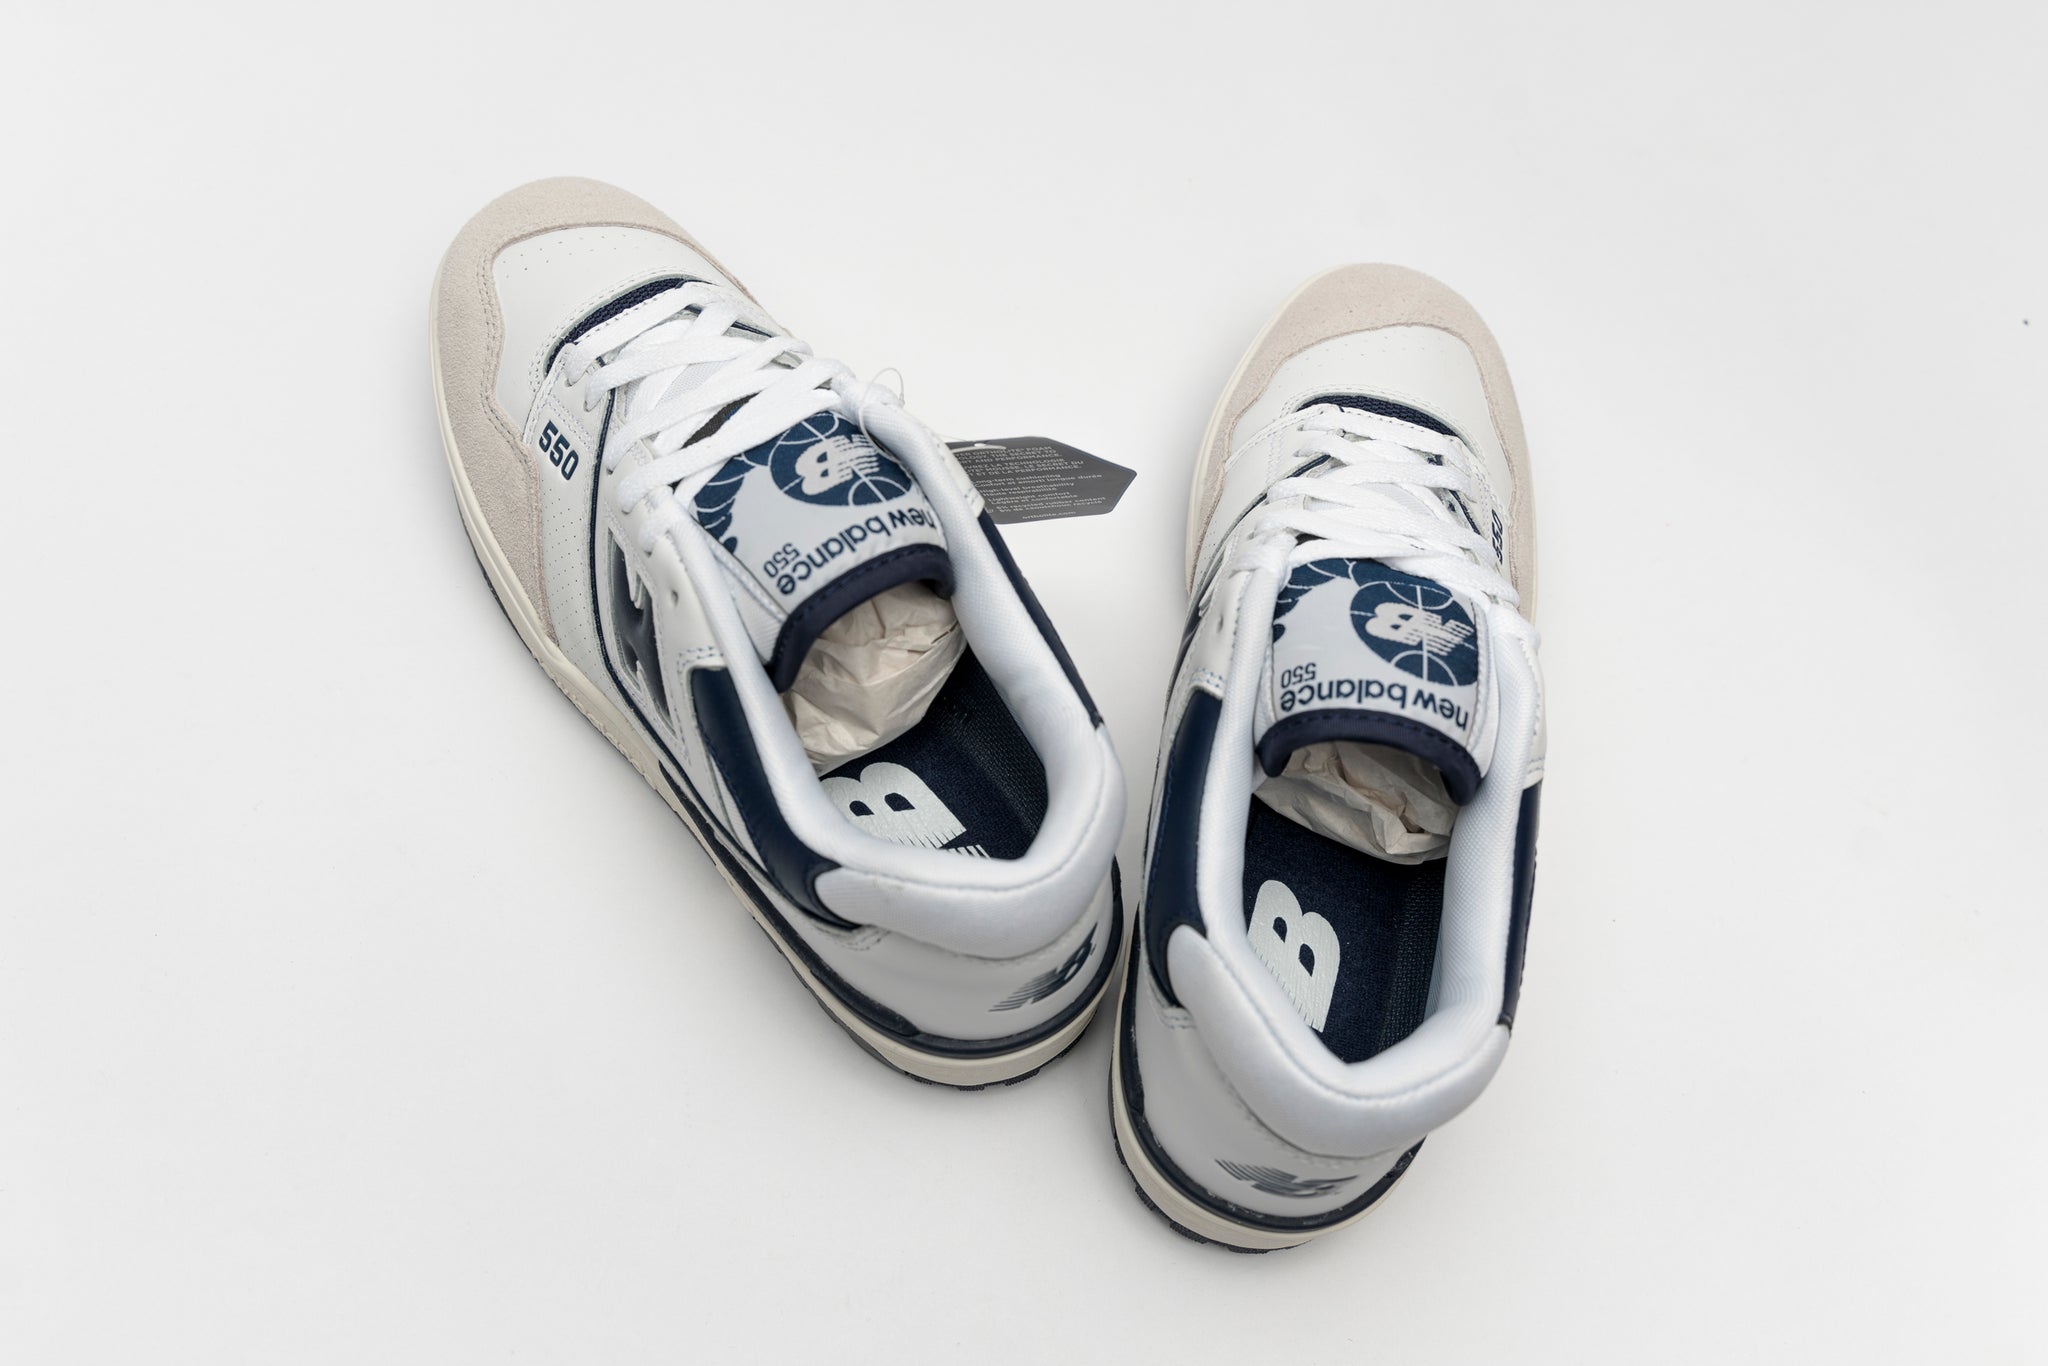 550 White/Navy Blue sneakers